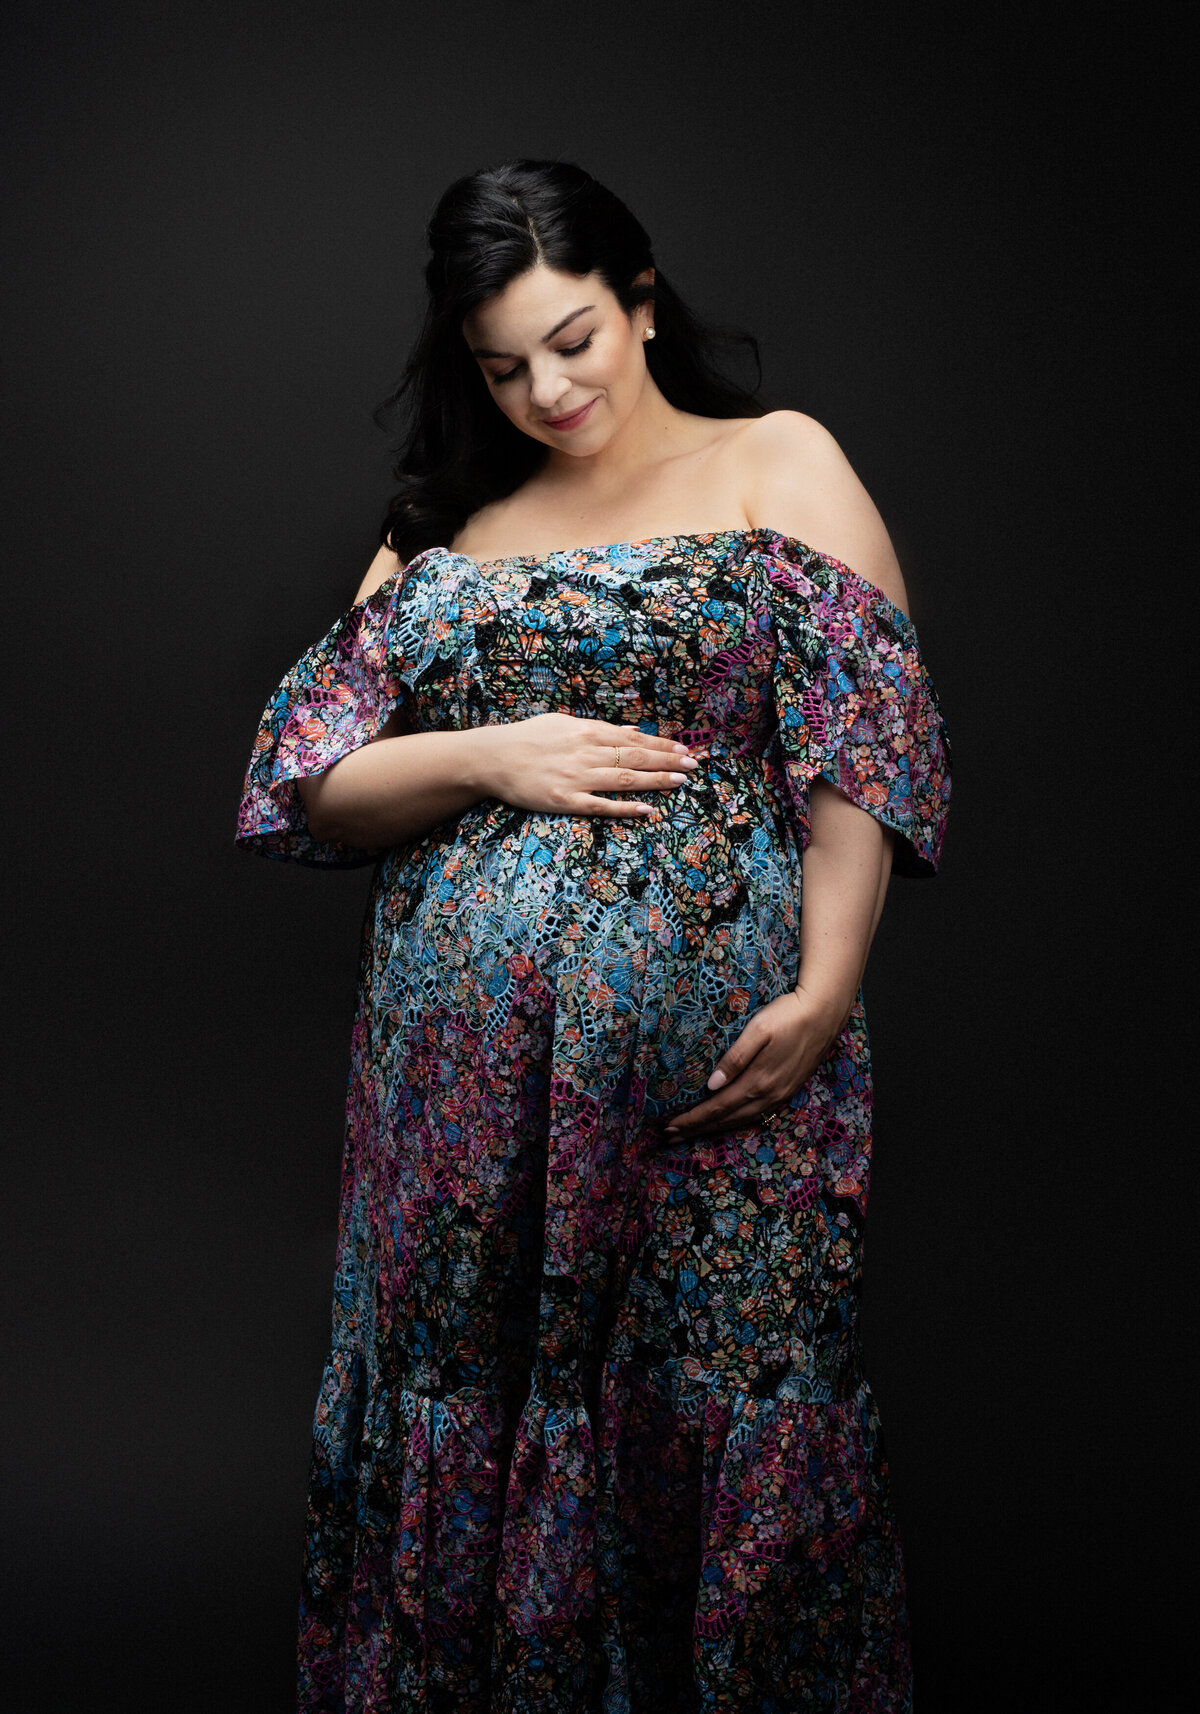 maternity-photo-woman-with-black-hair-3